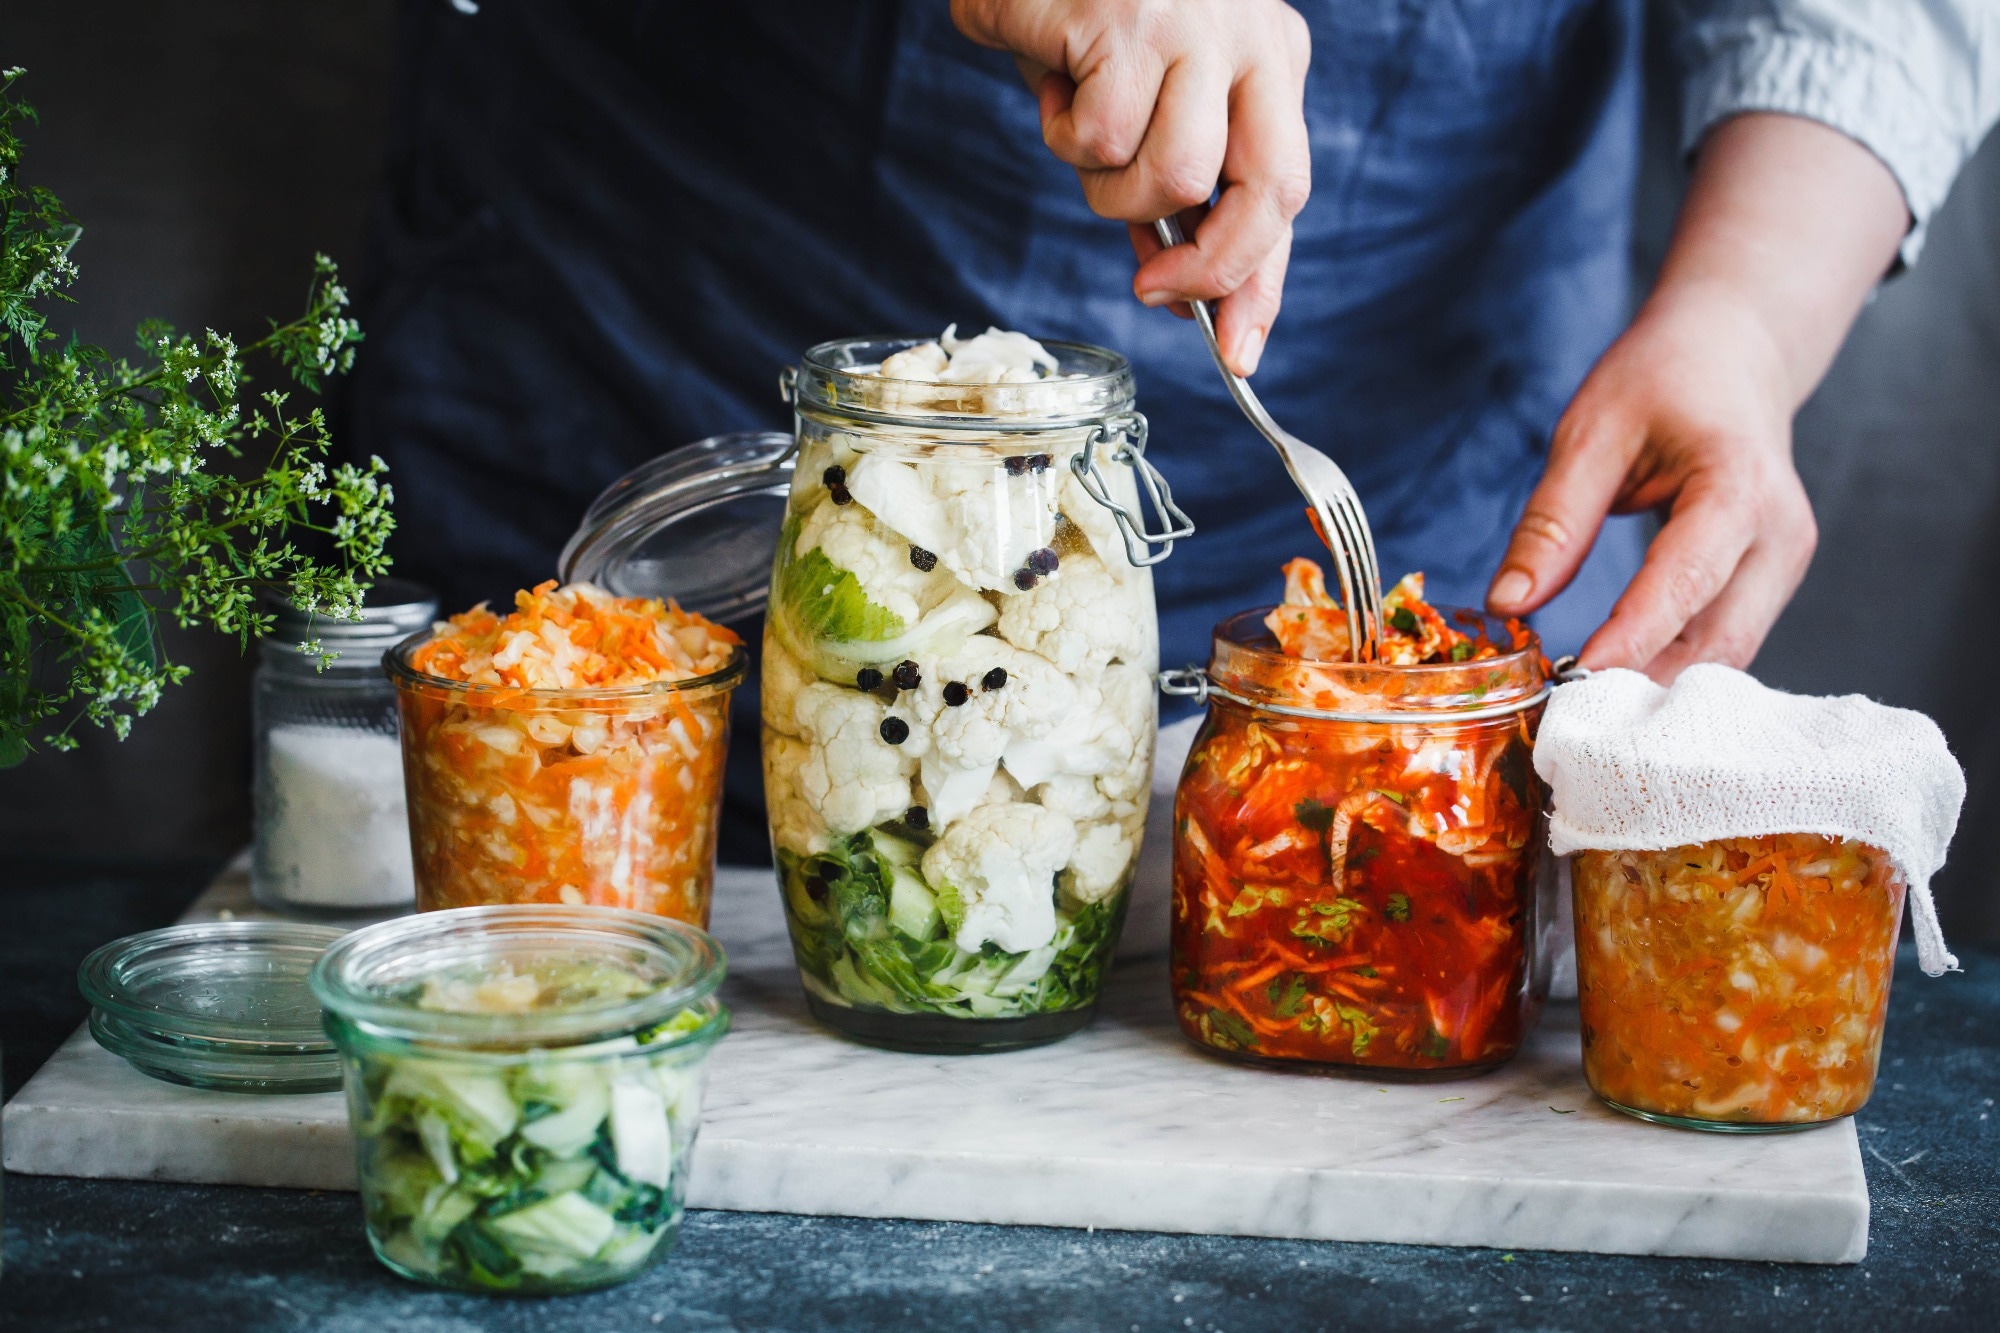 Study: Gut microbiome and cancer implications: Potential opportunities for fermented foods. Image Credit: casanisa/Shutterstock.com